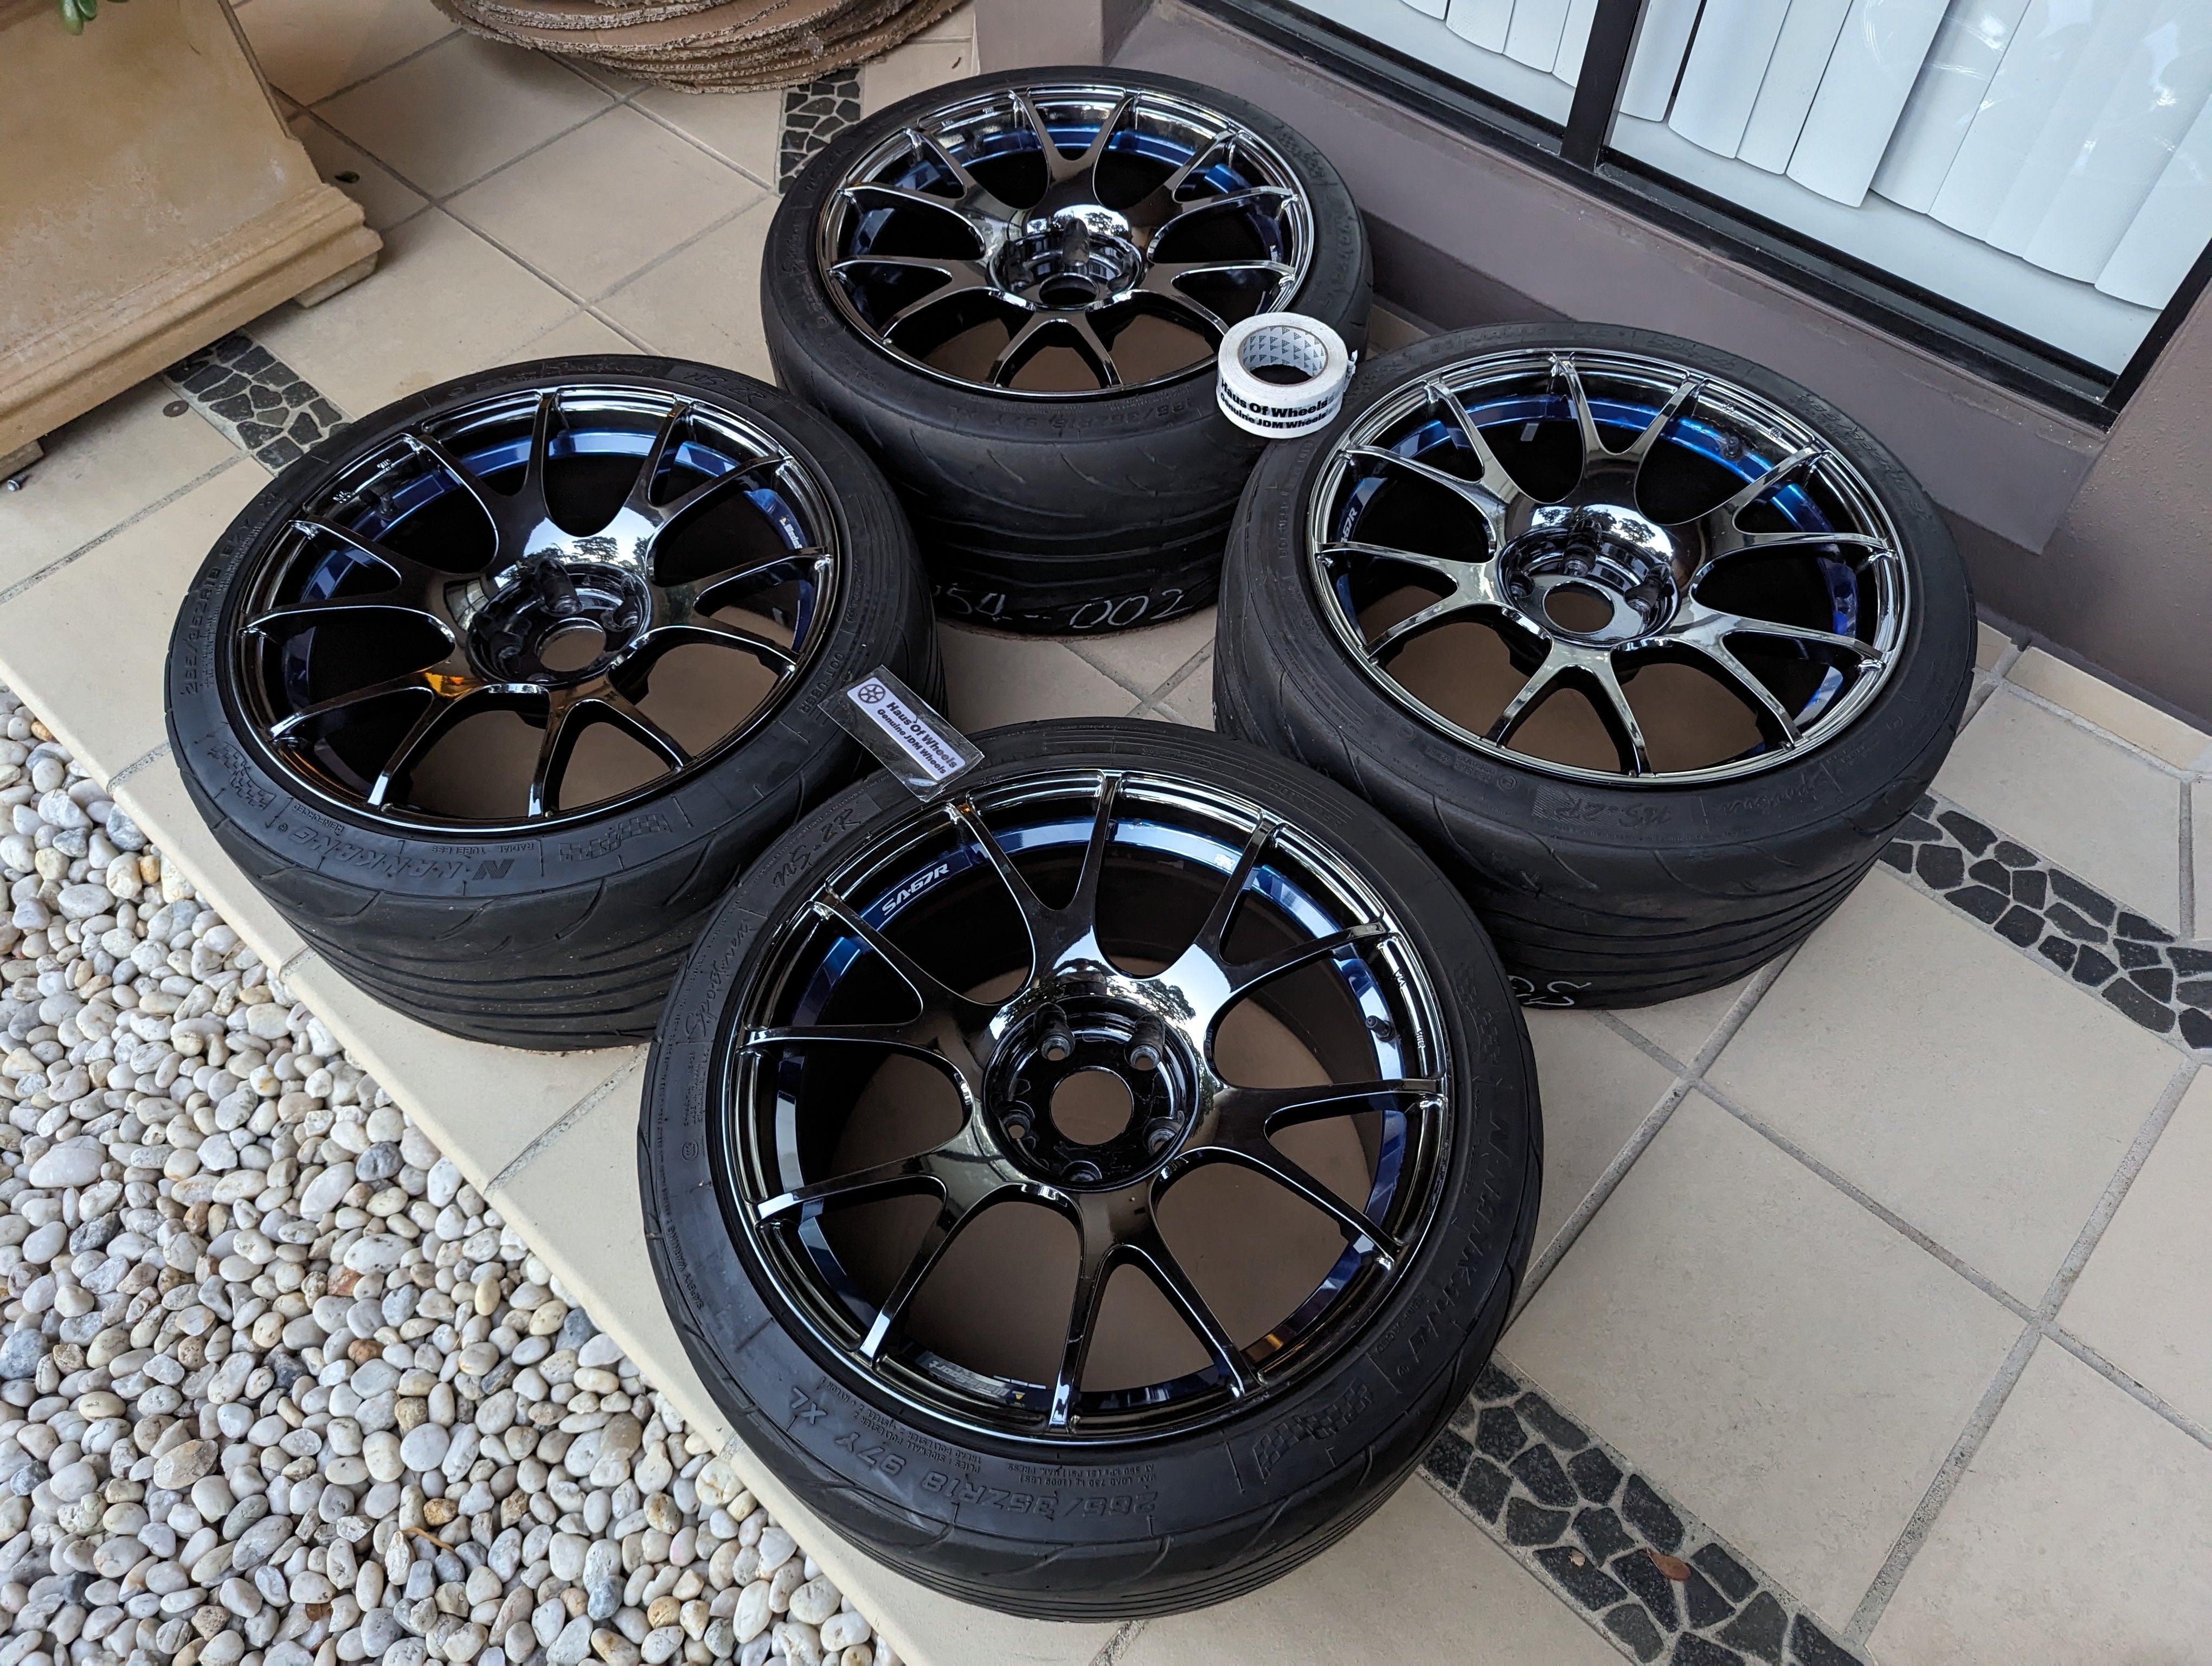 PCD 5x114.3 *Chrome* Wedssport SA67R in Shadow Blue Chrome with Tyres